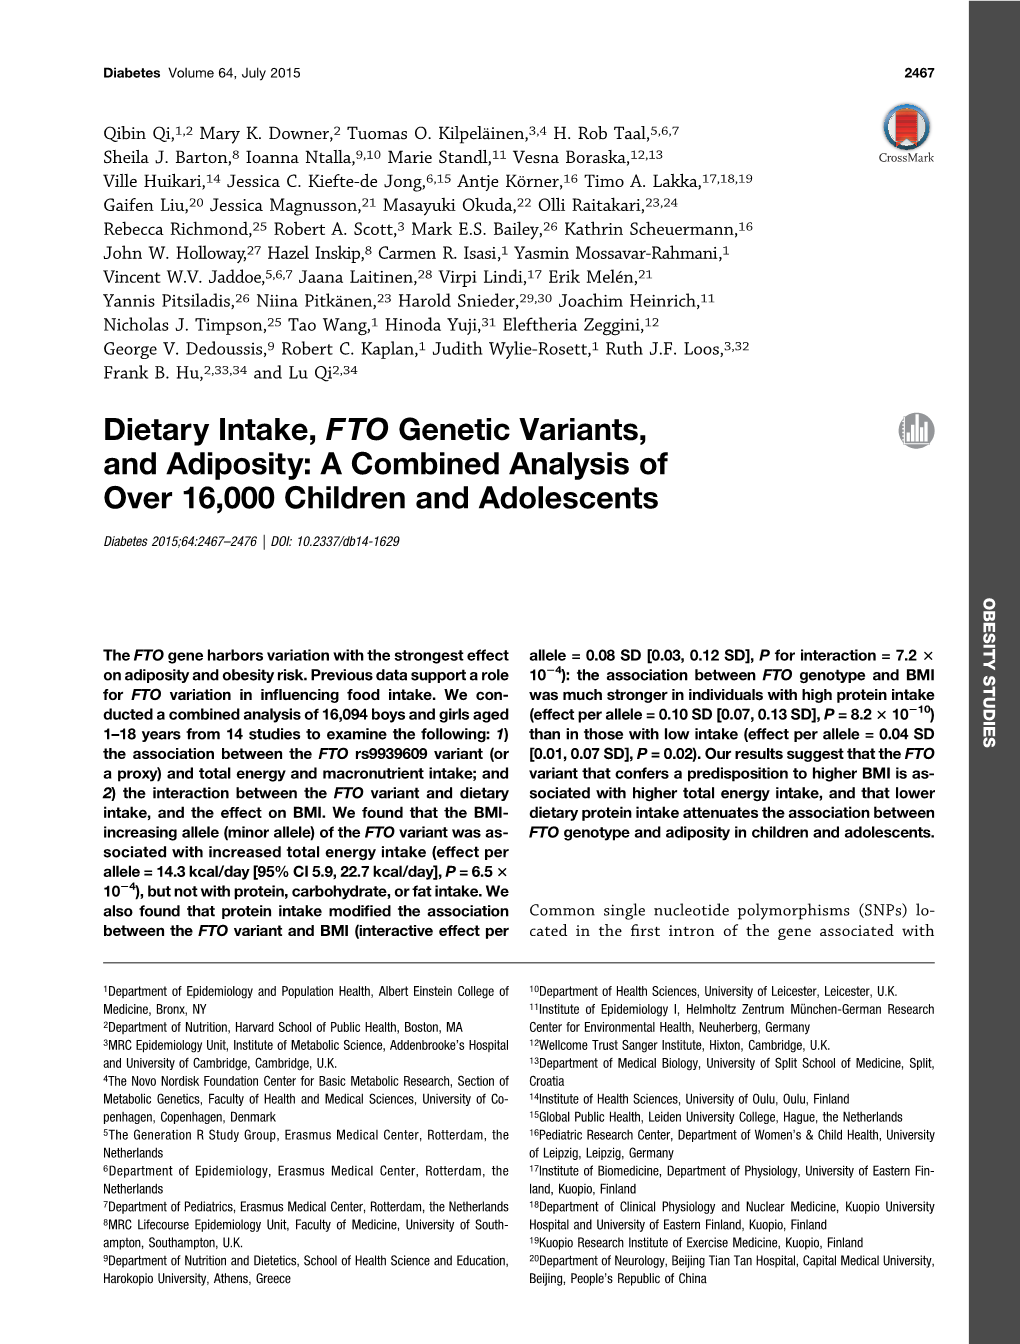 Dietary Intake, FTO Genetic Variants, and Adiposity: a Combined Analysis of Over 16,000 Children and Adolescents